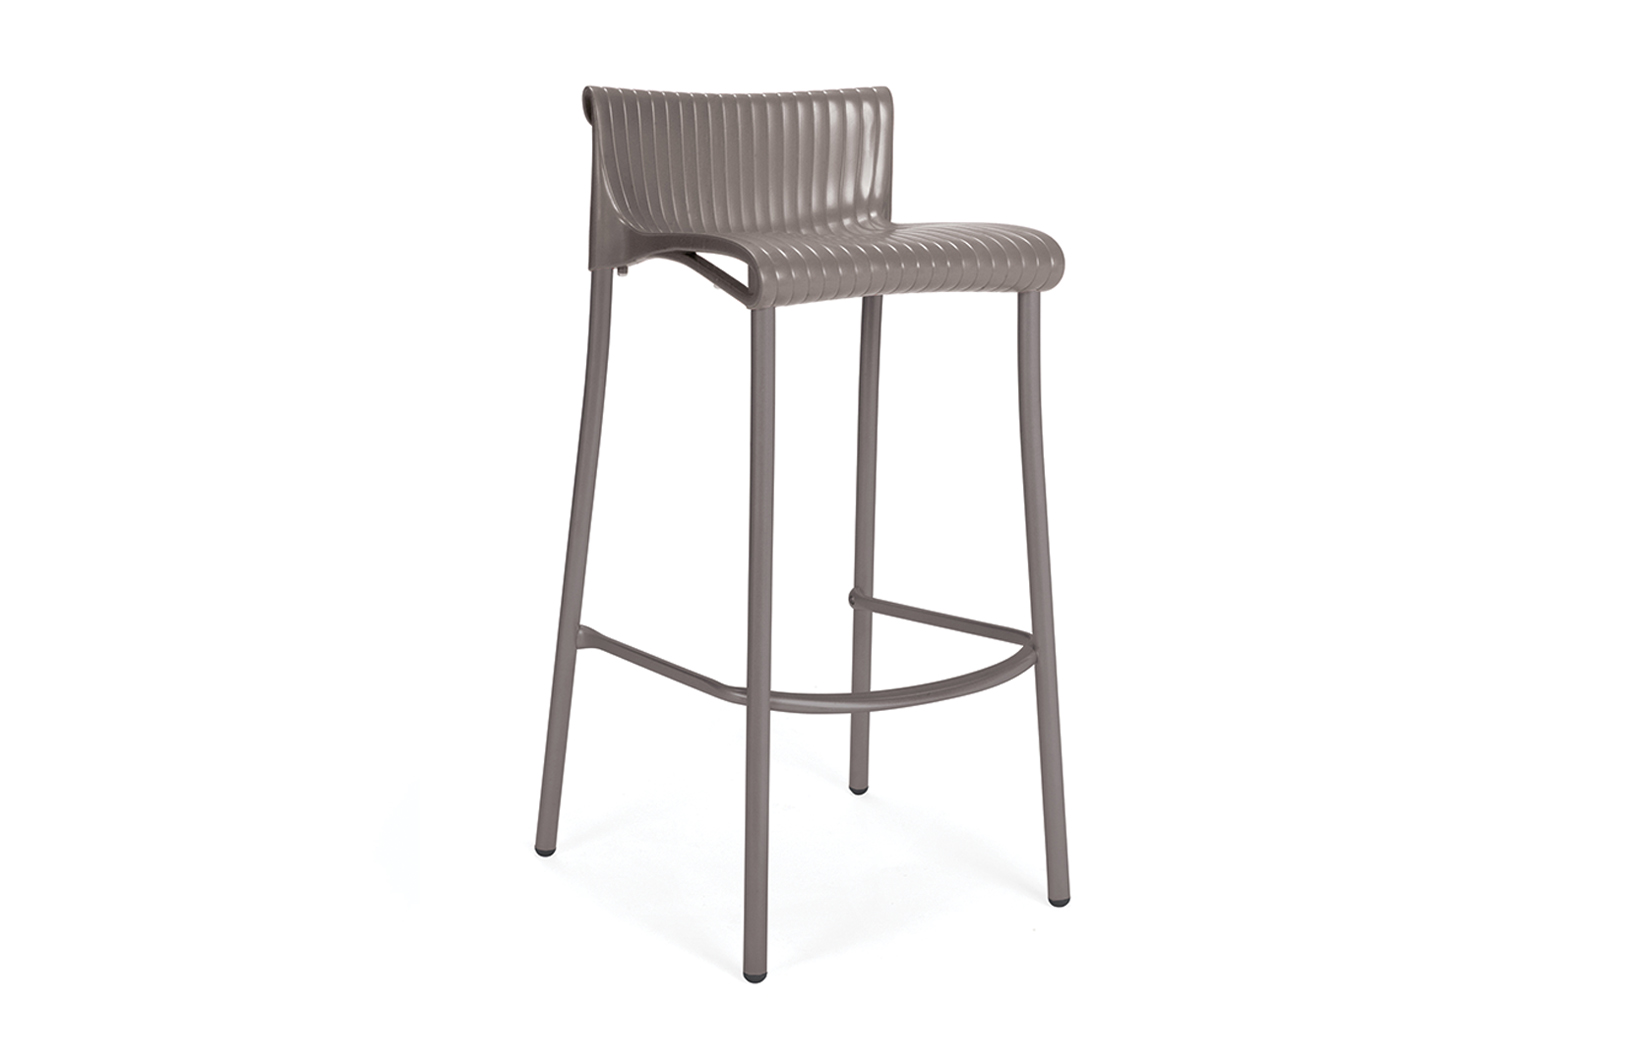 Euro Form Collection Duca Bar Stool